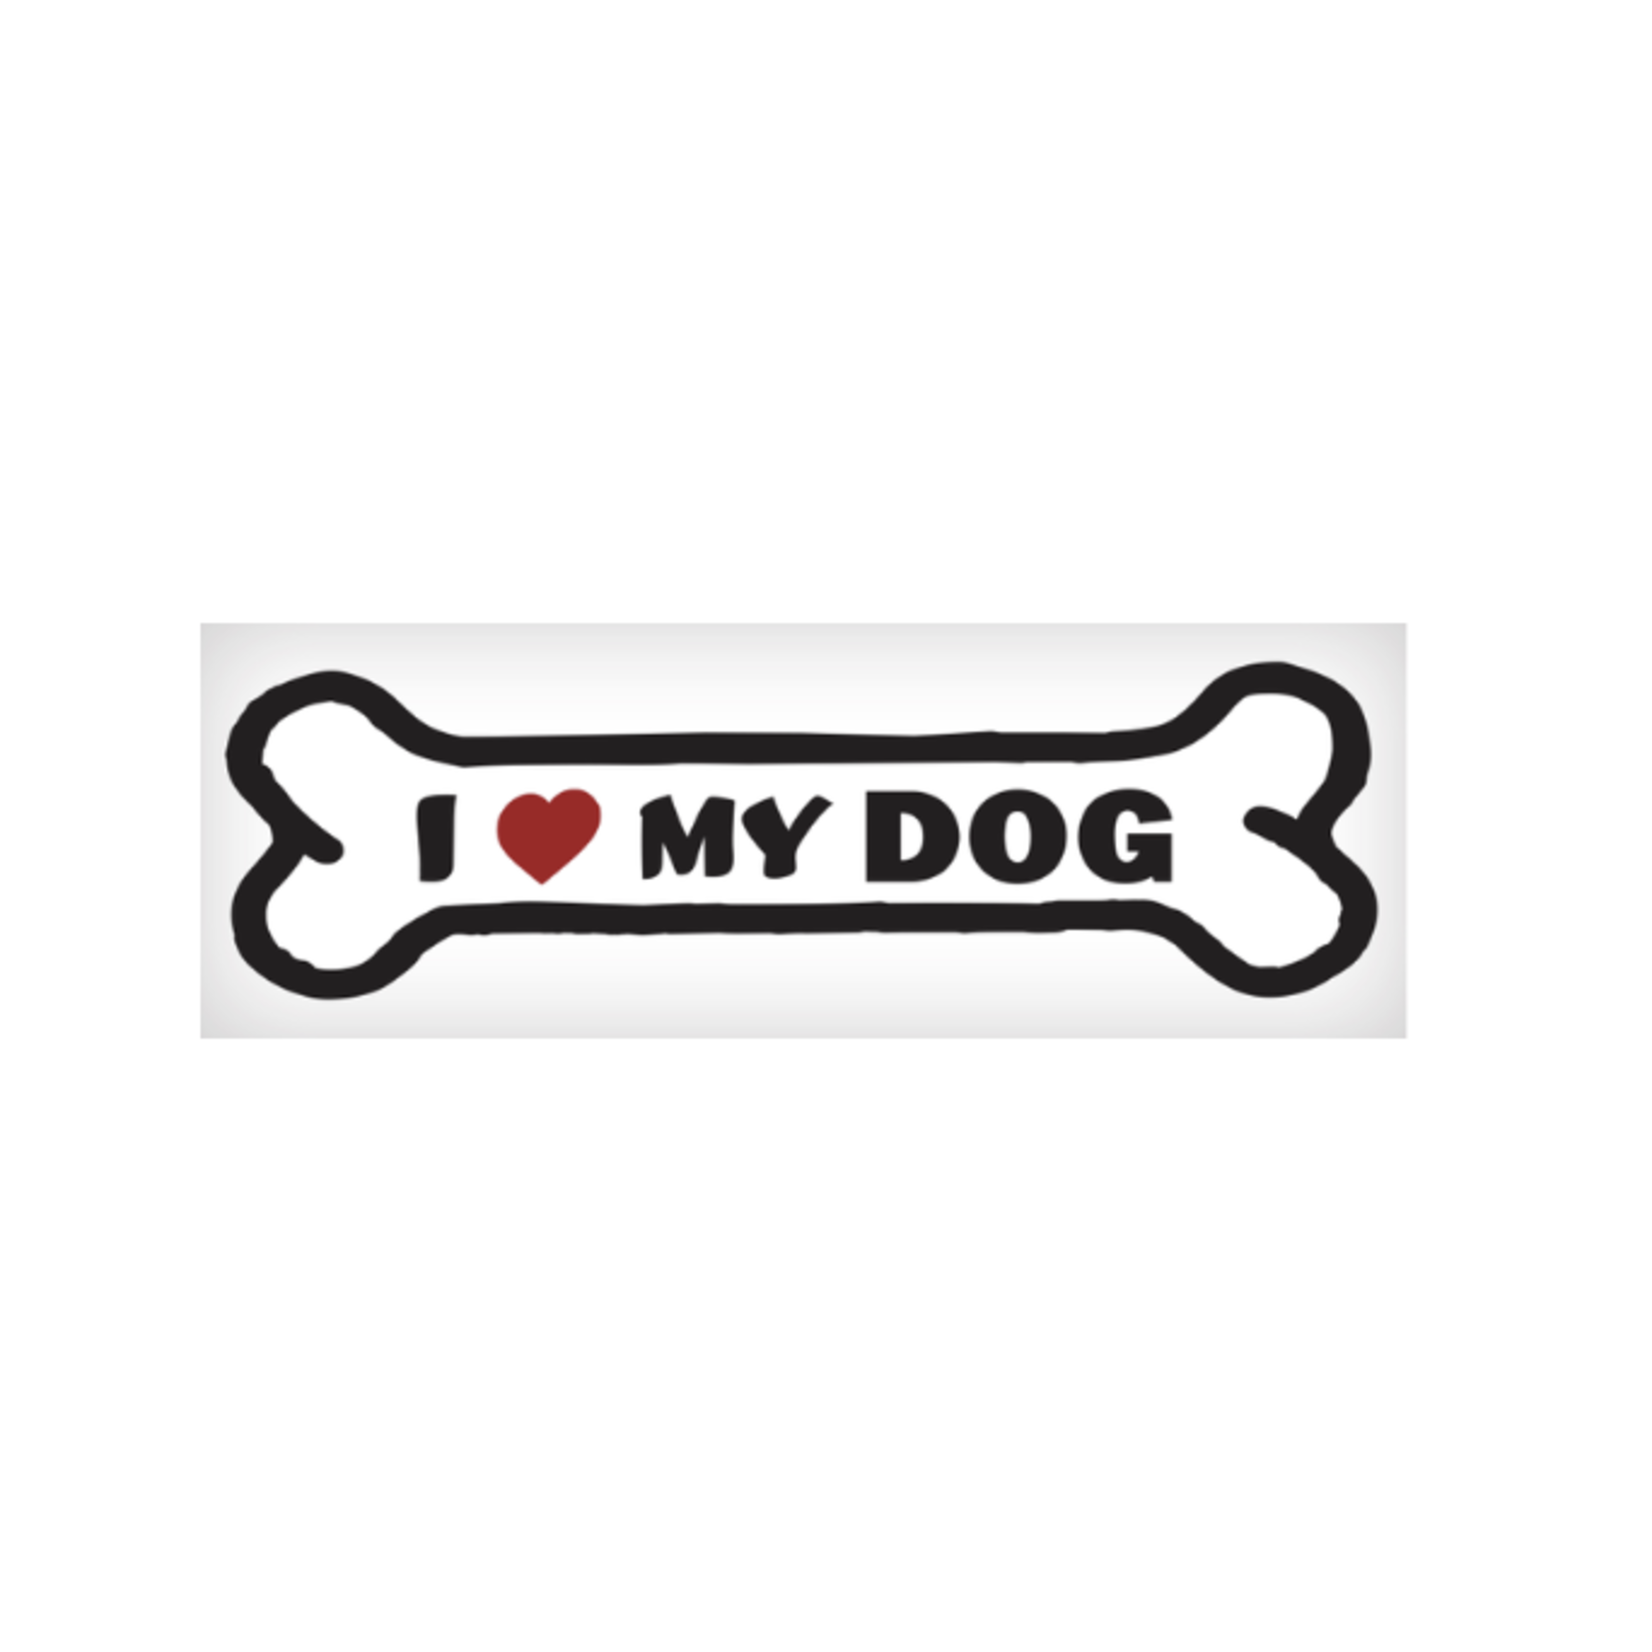 Stickers I Love My Dog Car Decal